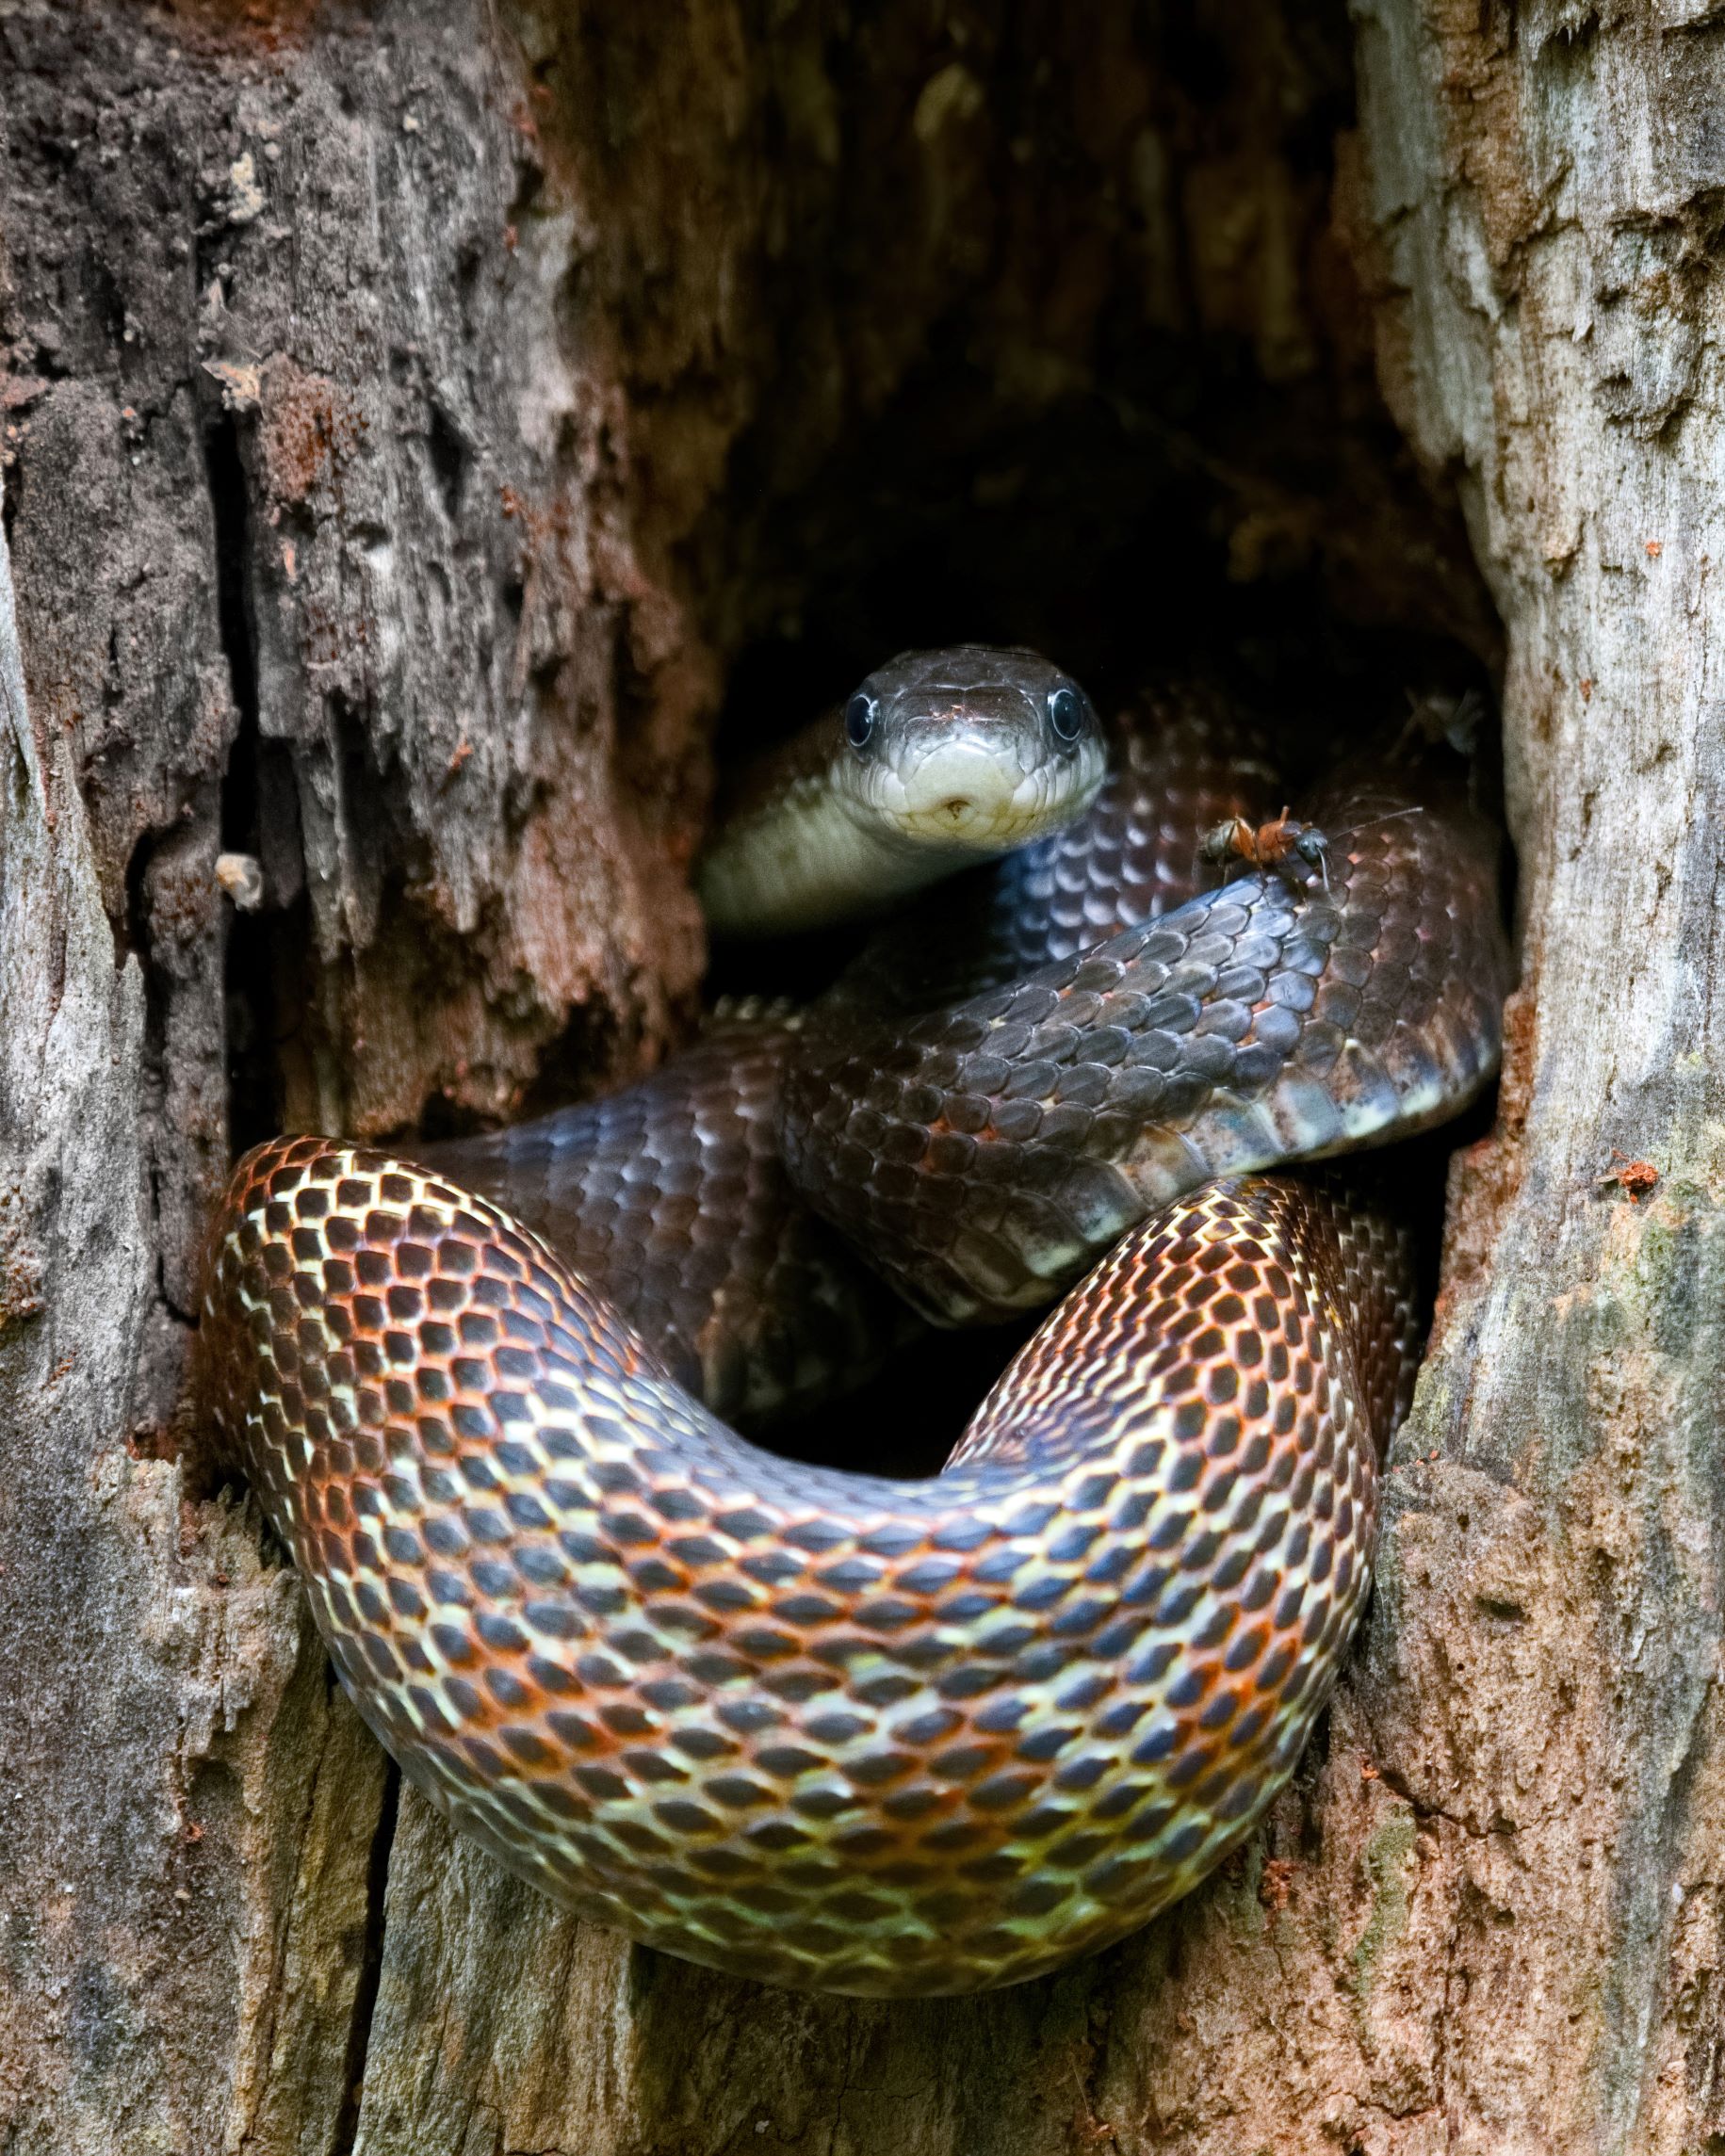 A black ratsnake curled in a tree hollow stares directly at camera